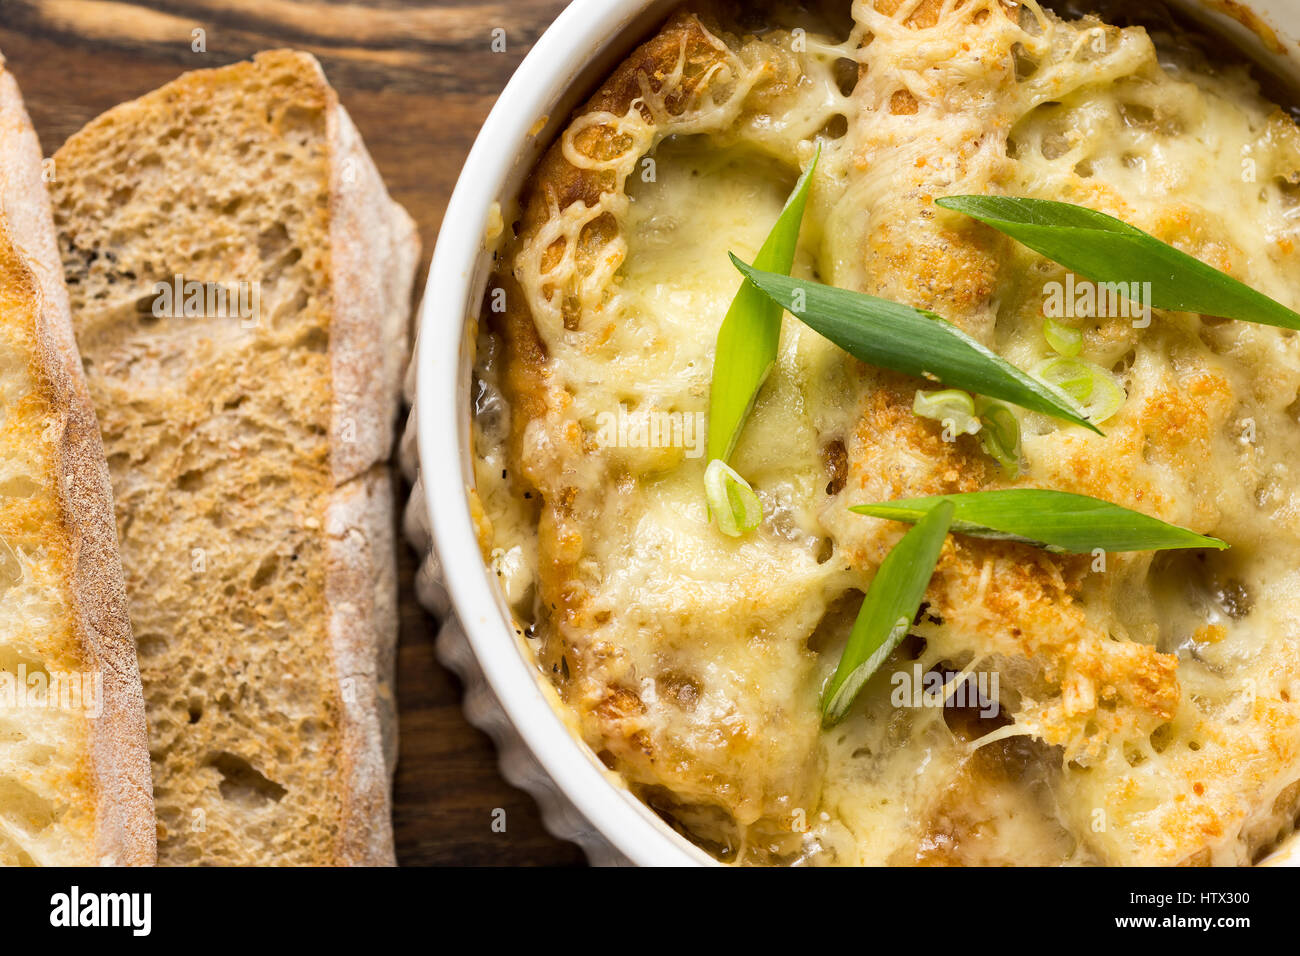 French Onion Soup with Dried Bread and Melted Cheese Stock Photo